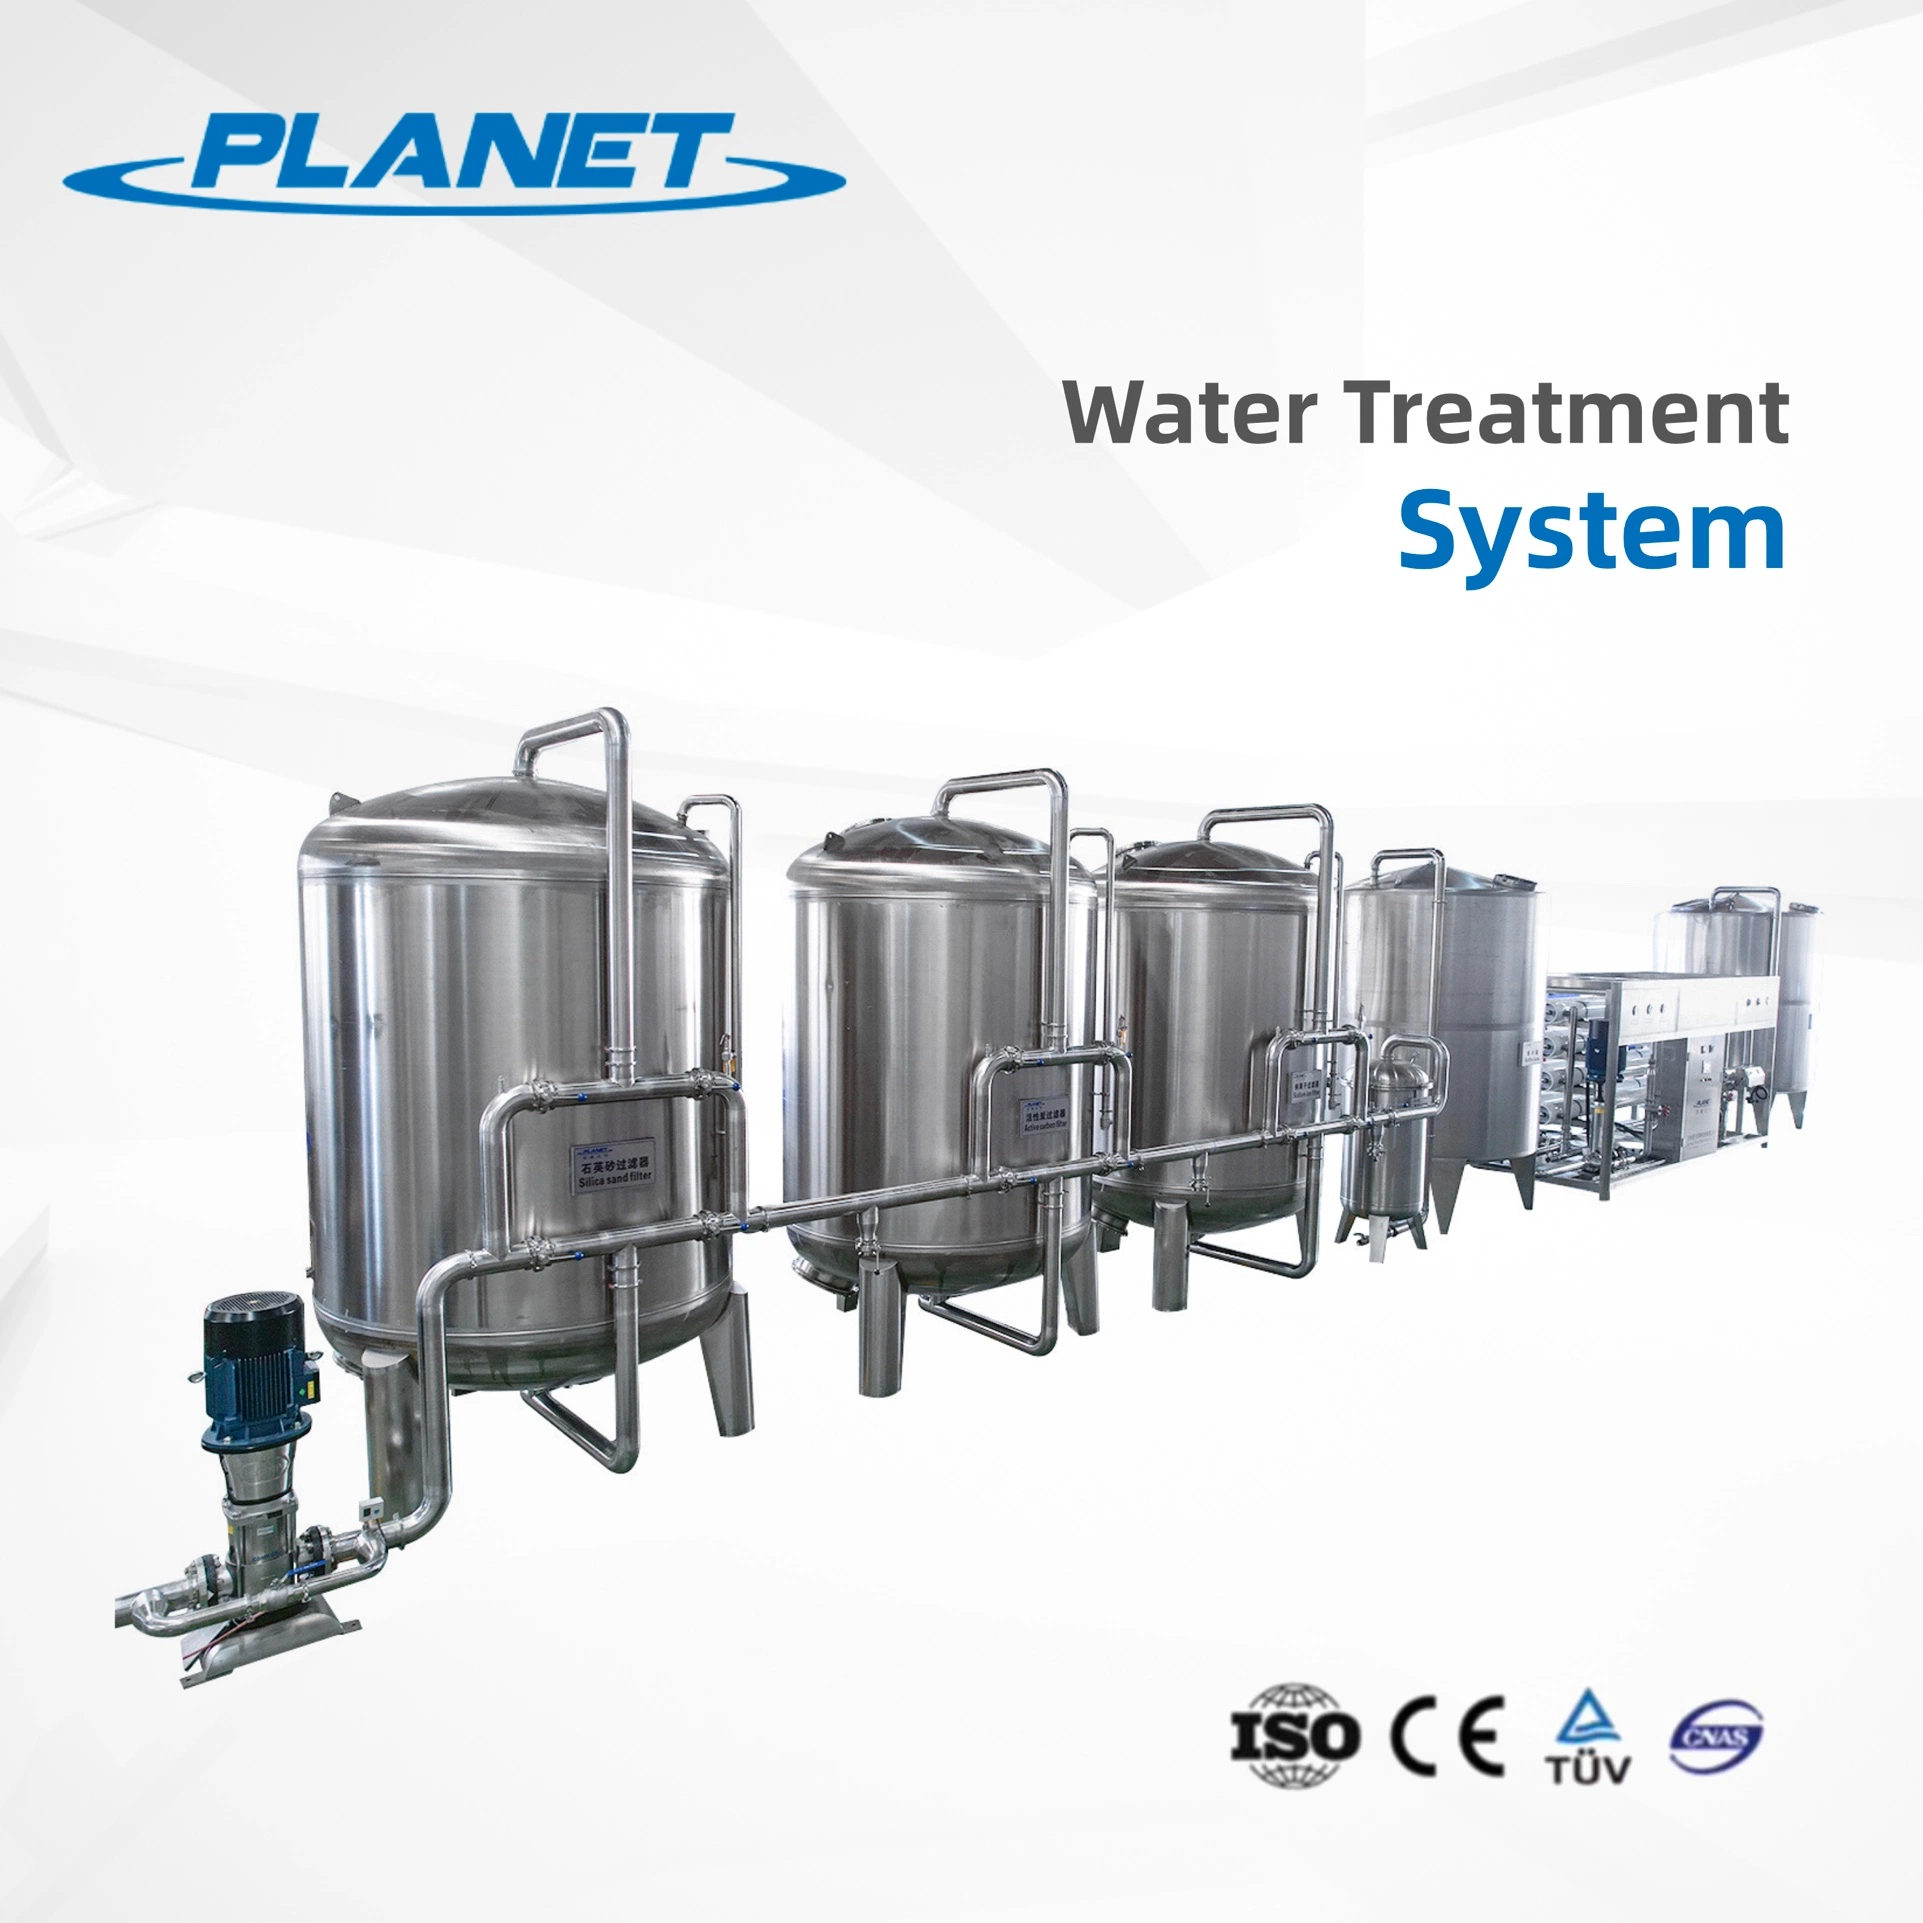 RO Water Drinking Water Desalination Industry Industrial Waste Water Treatment Plant Water Purification Reverse Osmosis Water Filter System Systems Appliances